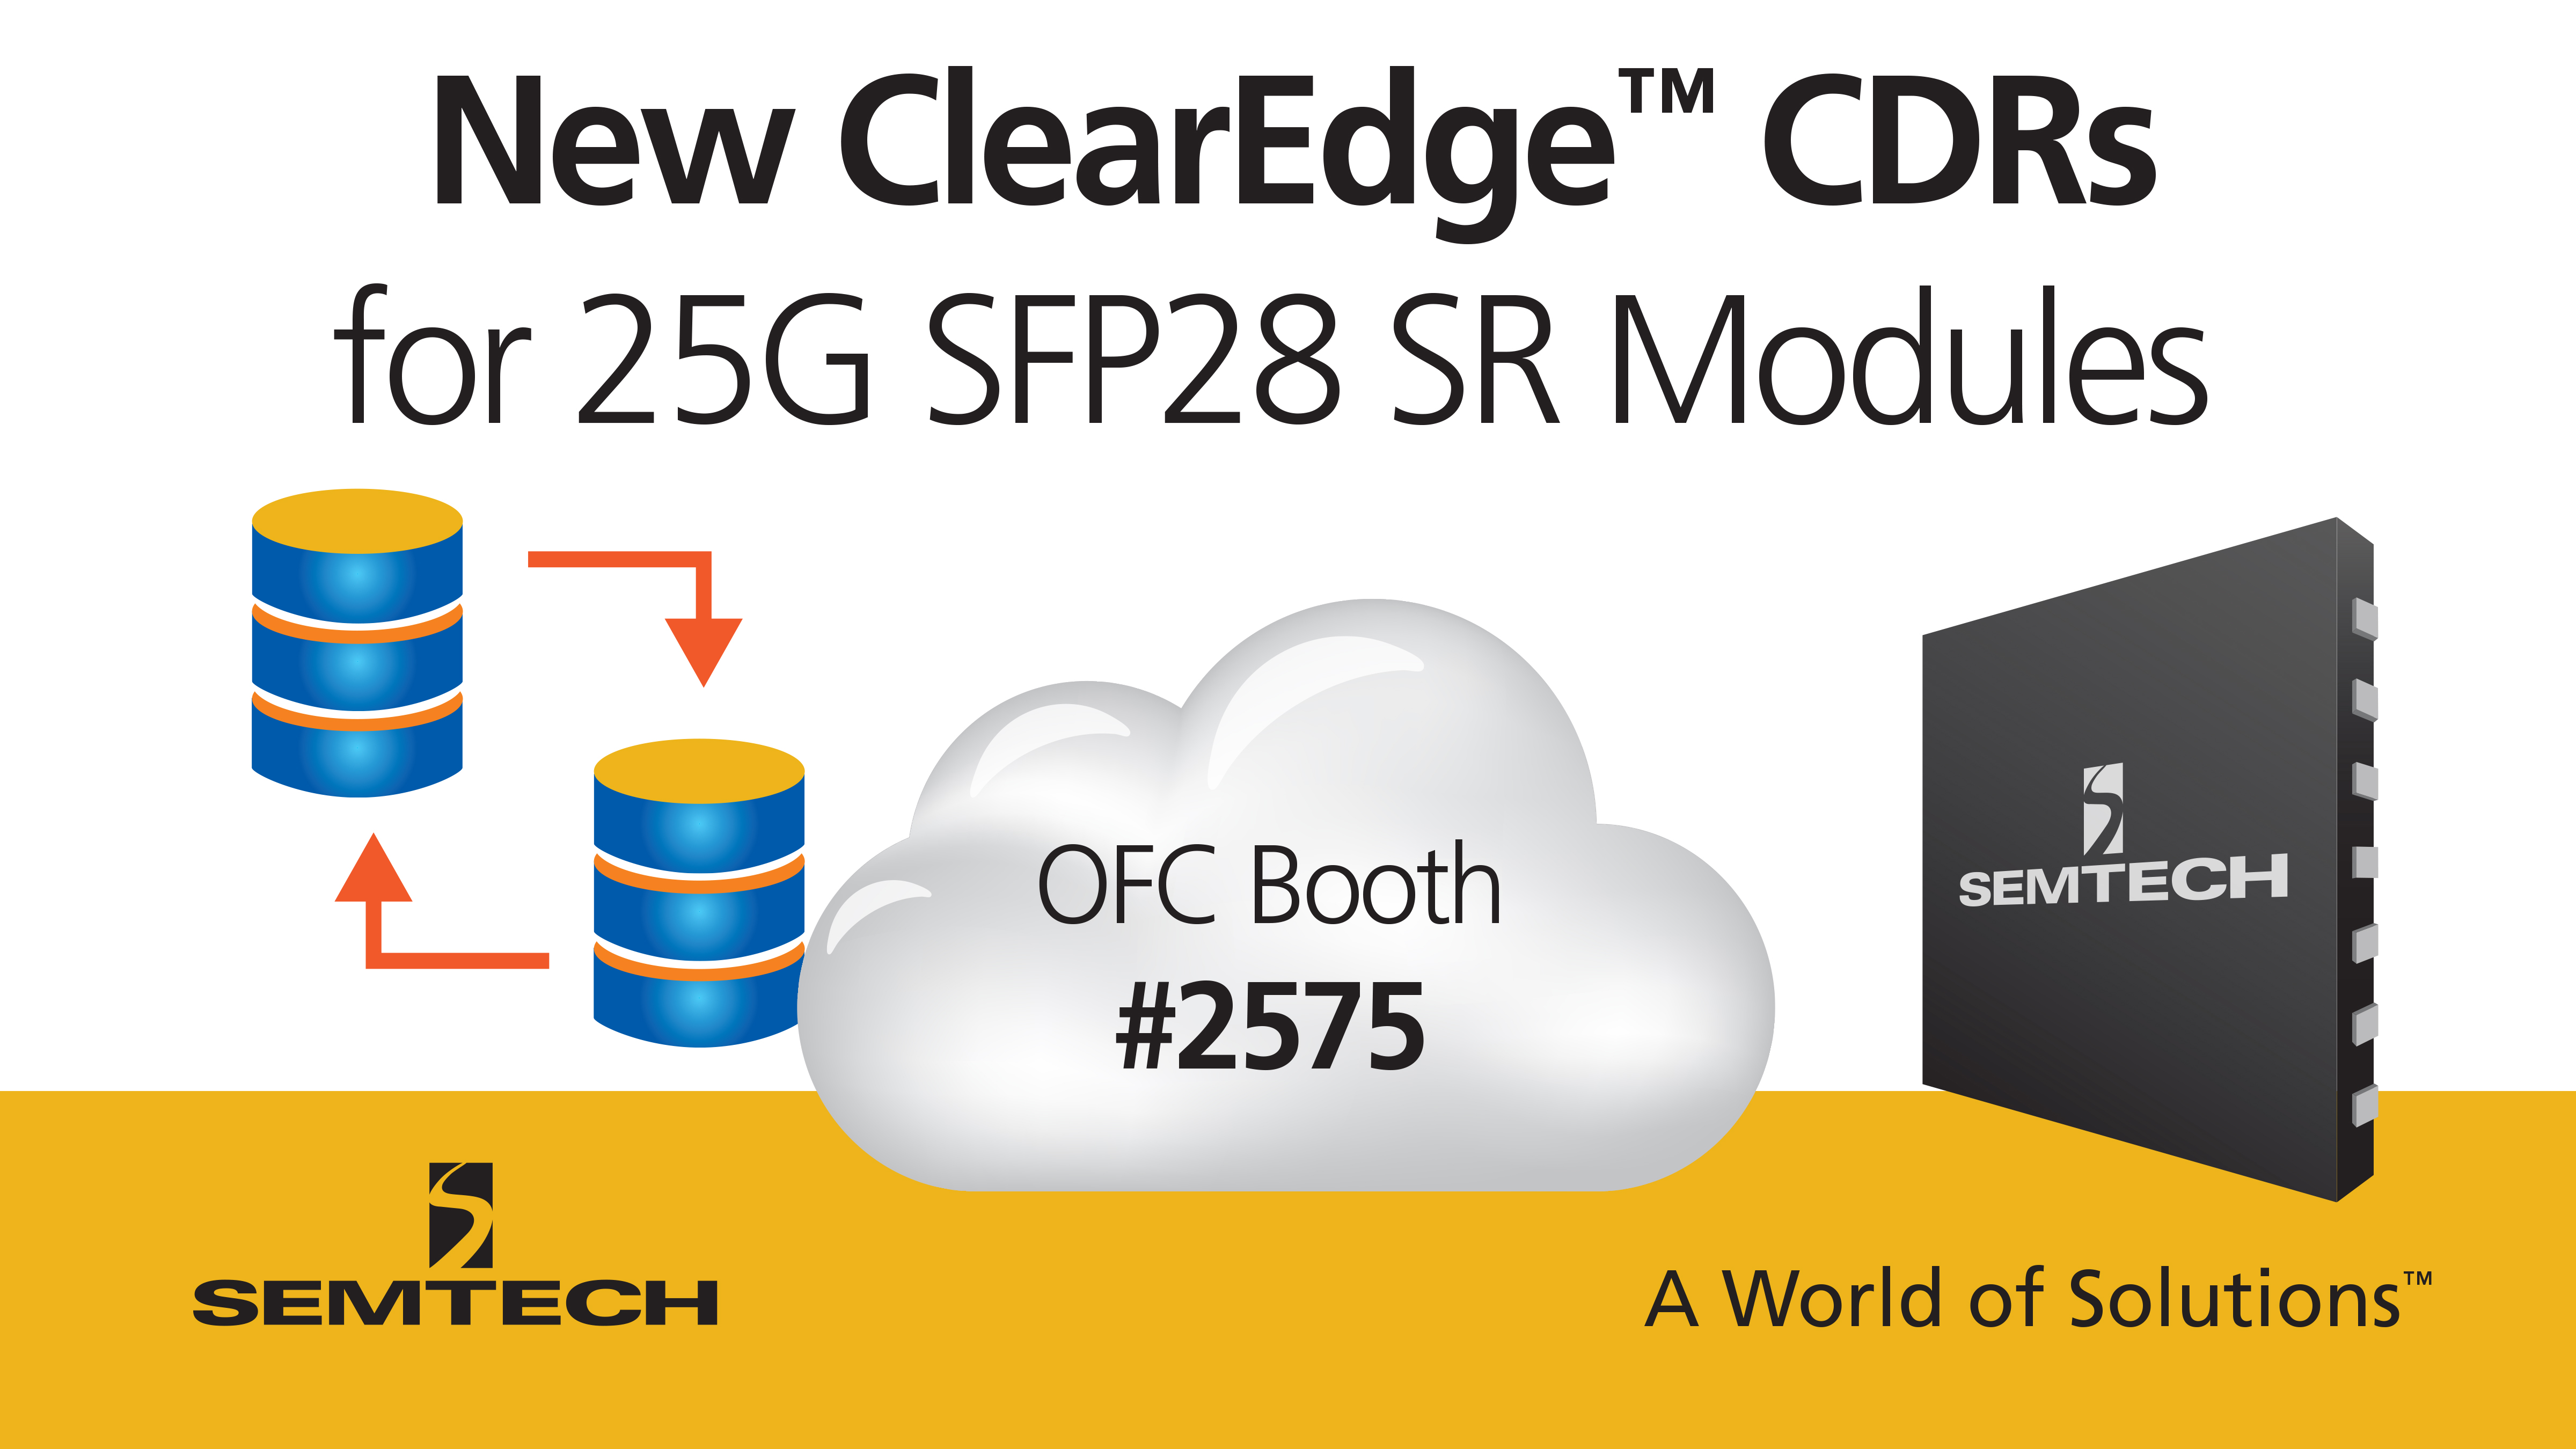 Semtech Expands Its ClearEdge™ CDR Portfolio for Low-Cost 25G SFP28 SR Modules and Active Optical Cables